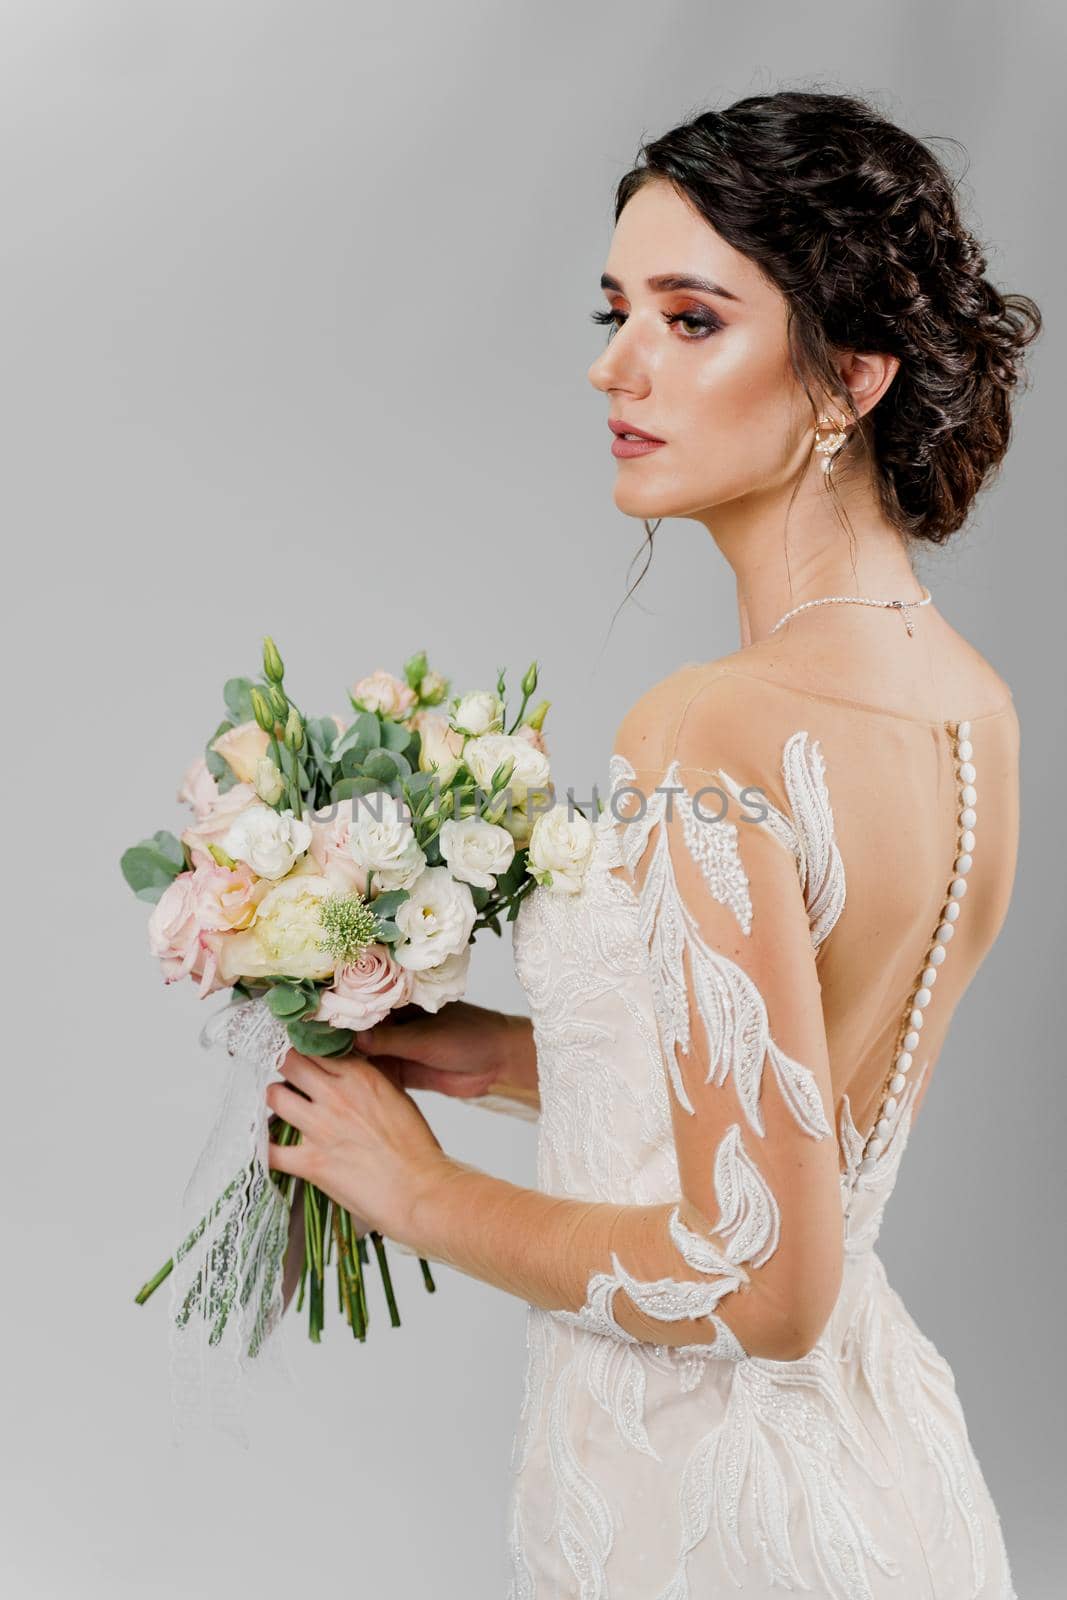 Bride in wedding dress holds bouquet and looks left side in studio on blank background. Attractive girl portrait